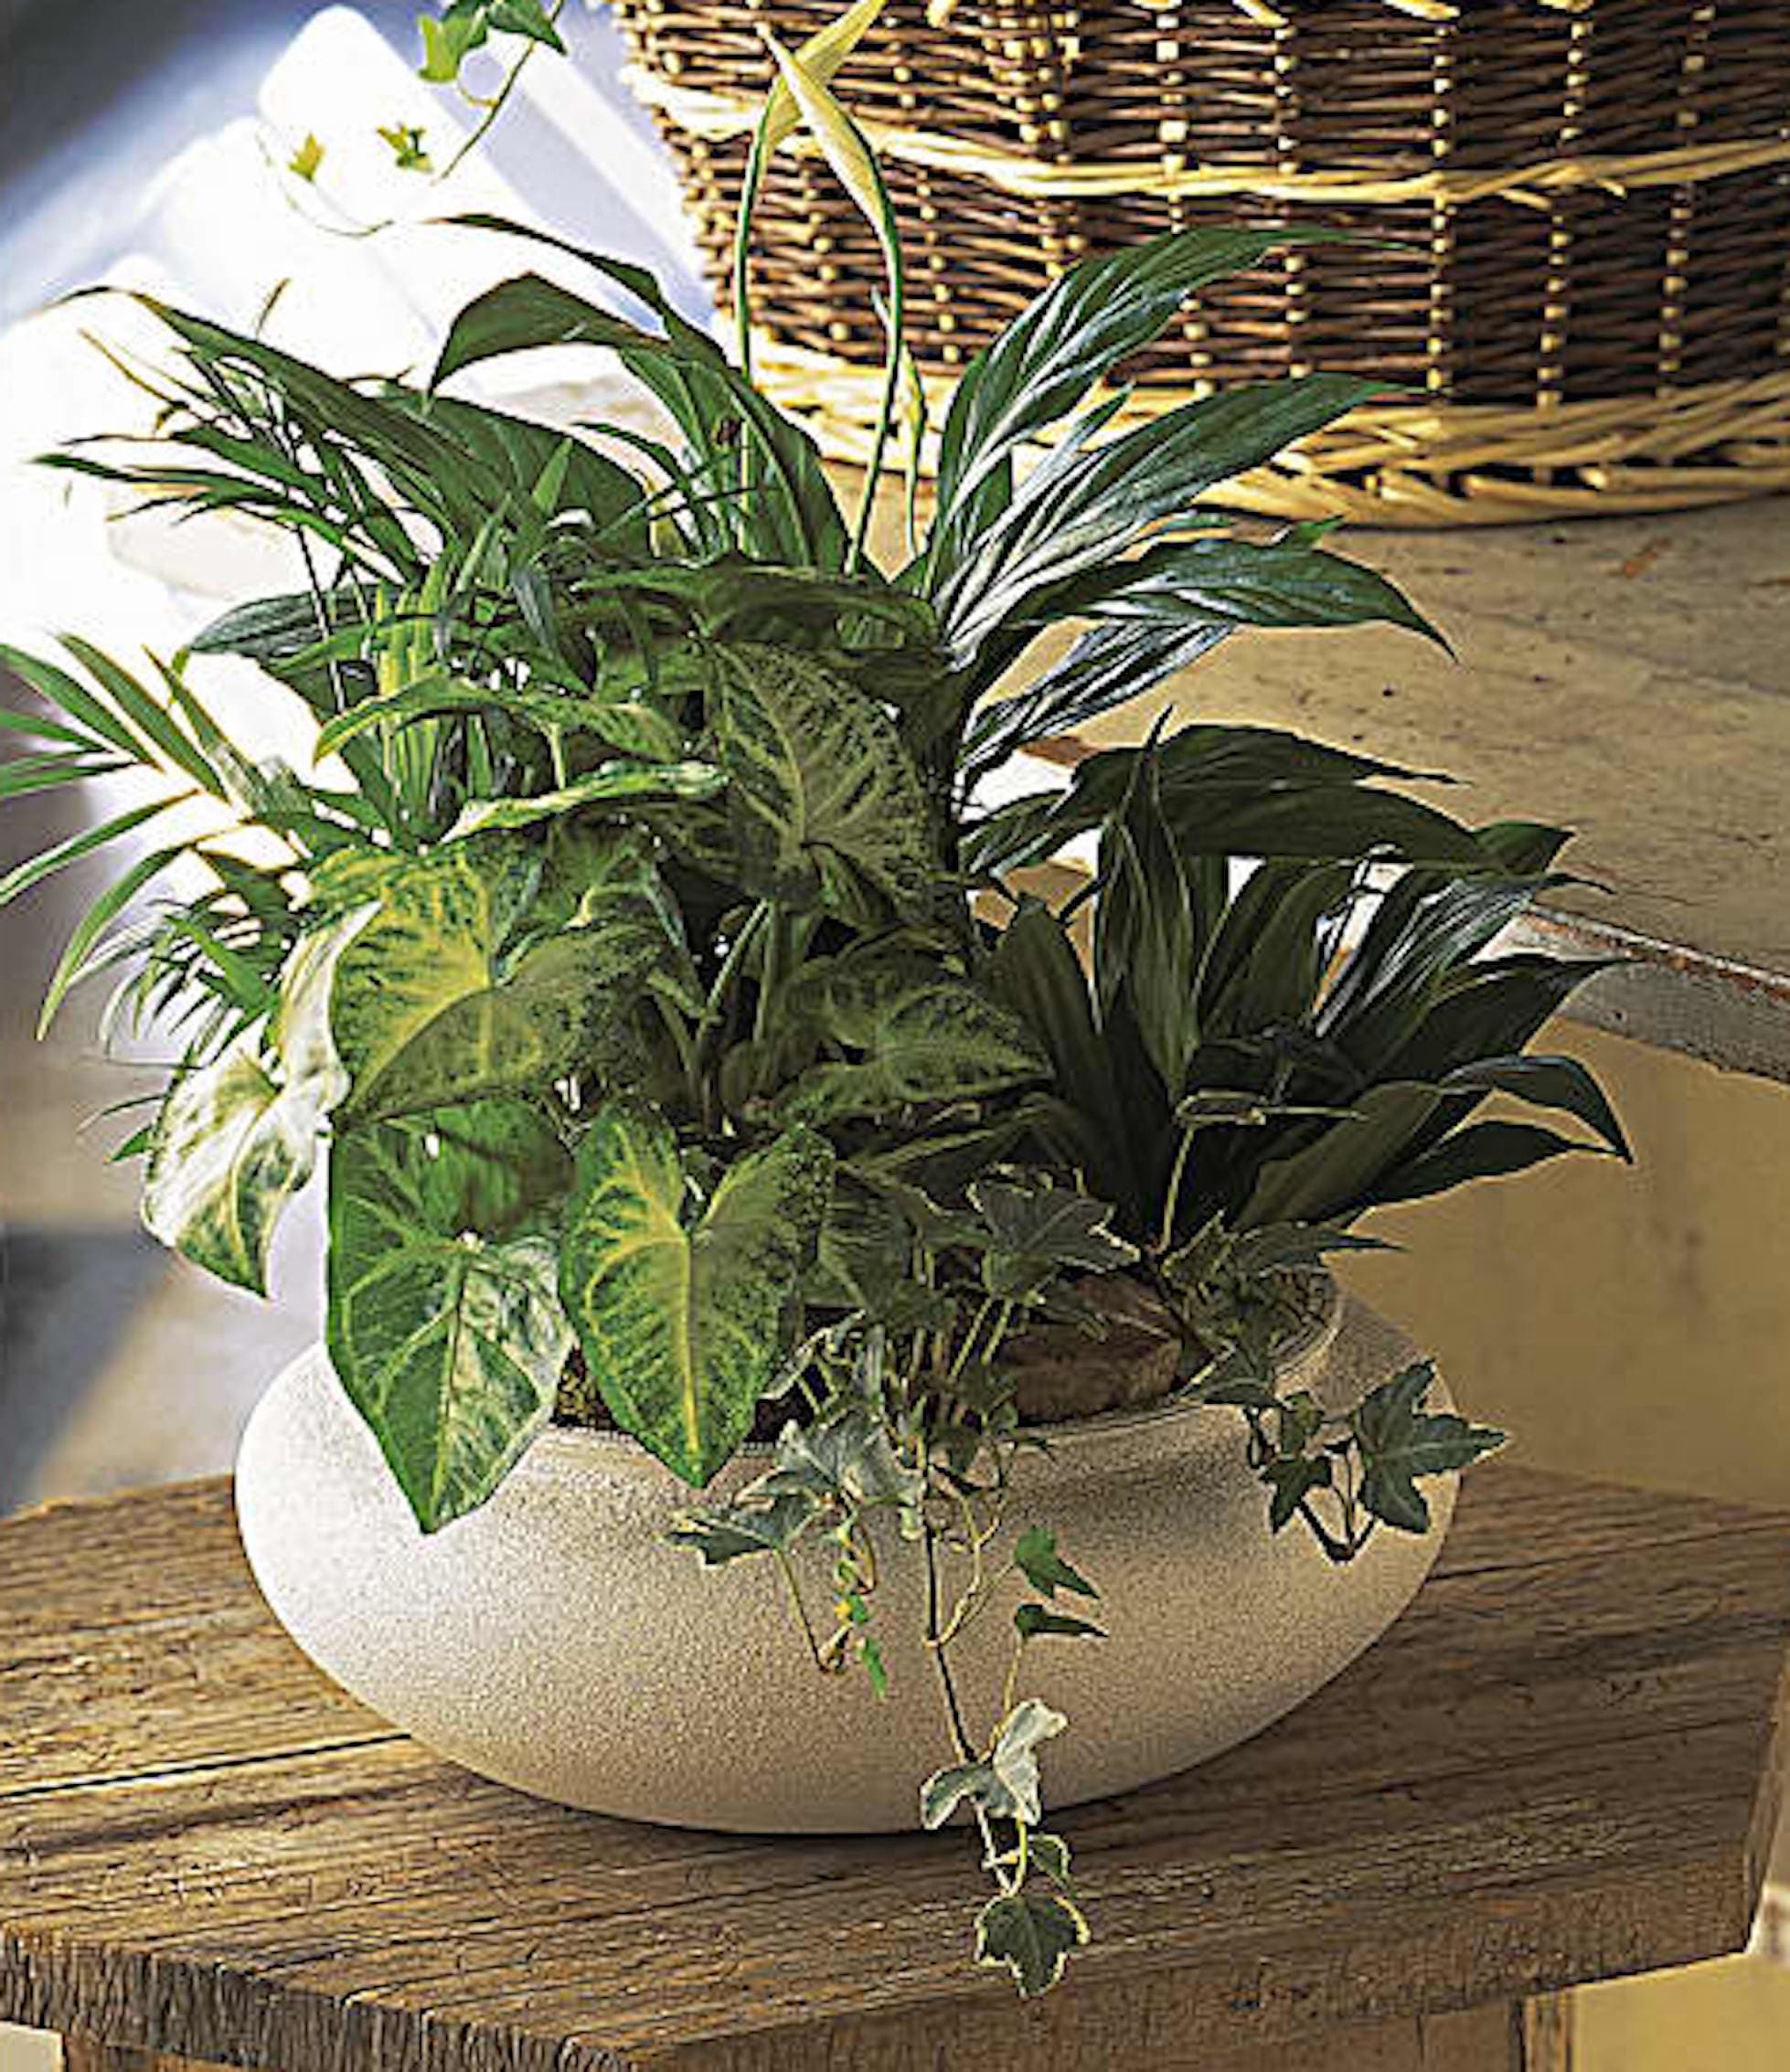 Dish Garden - Designers Choice - A ceramic planter of designers choice filled with a variety of green house plants appropriate for any service. Send them something they can keep and enjoy for a long time. Three sizes to choose from and designer can add a complimenting bow. State your color preference for the bow in instructions when ordering. 